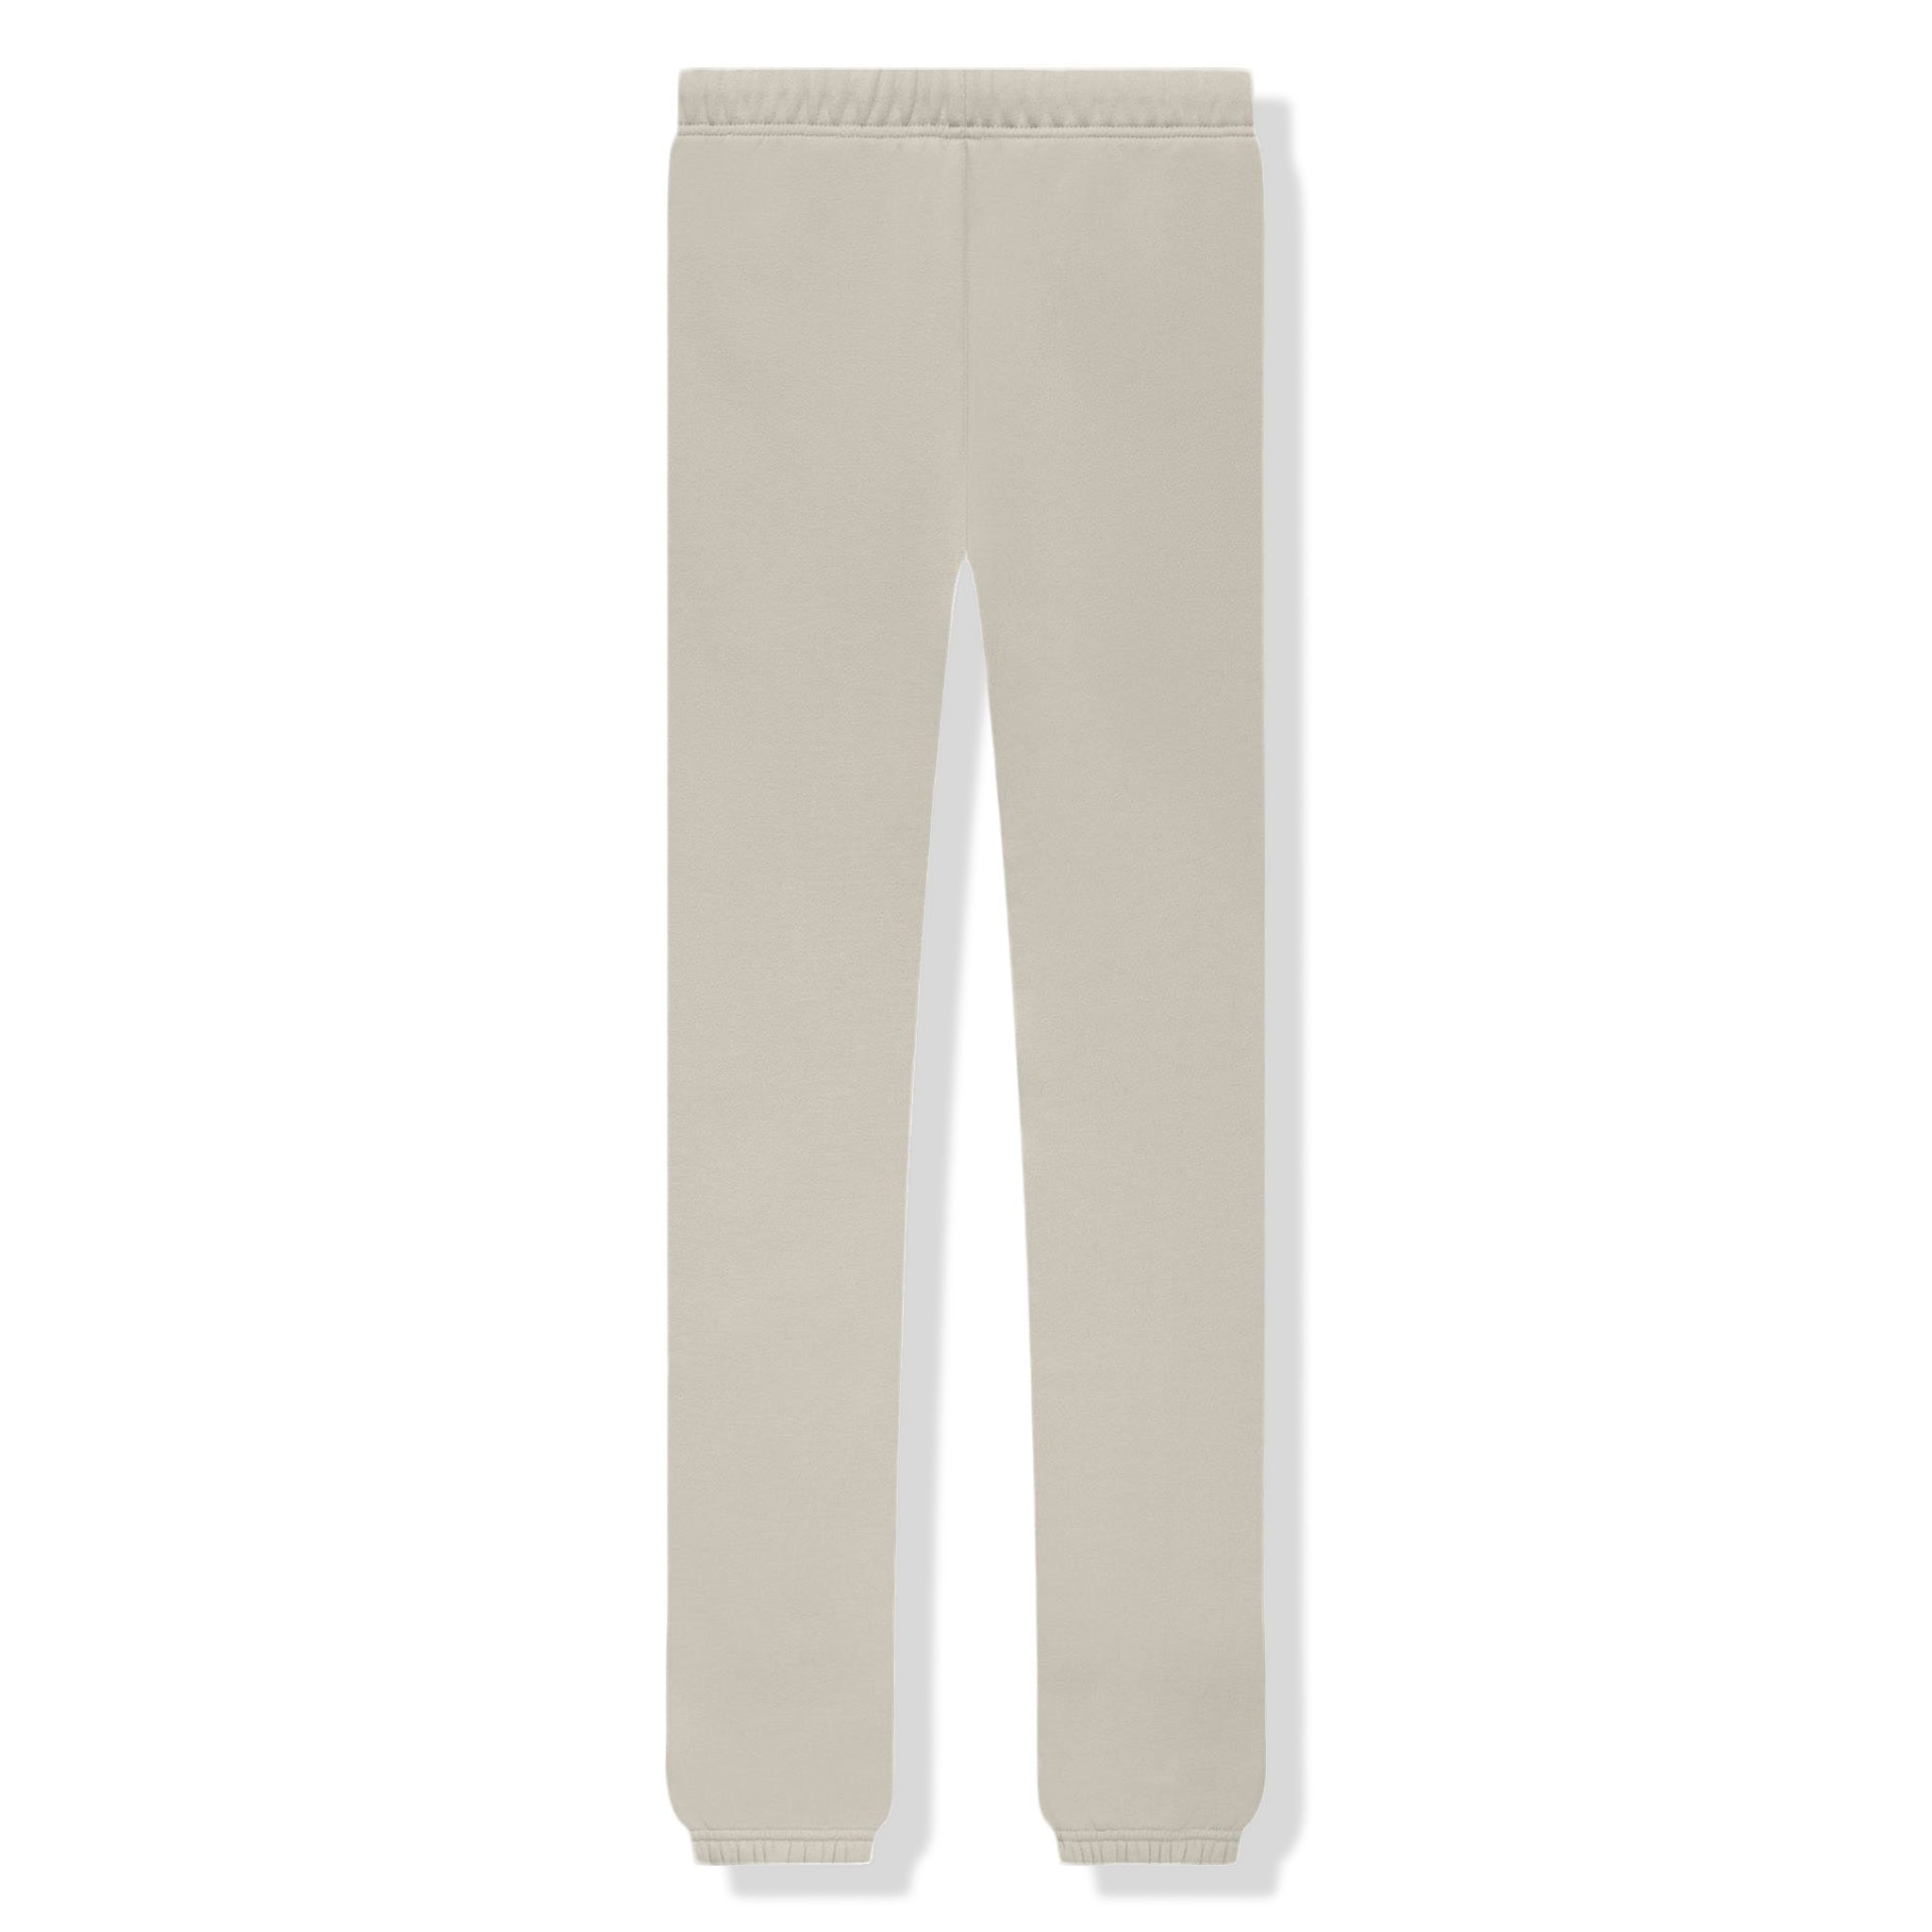 Essentials by Fear of God Desert Taupe Cotton Lounge Pants Size Large -  Sweats & hoodies